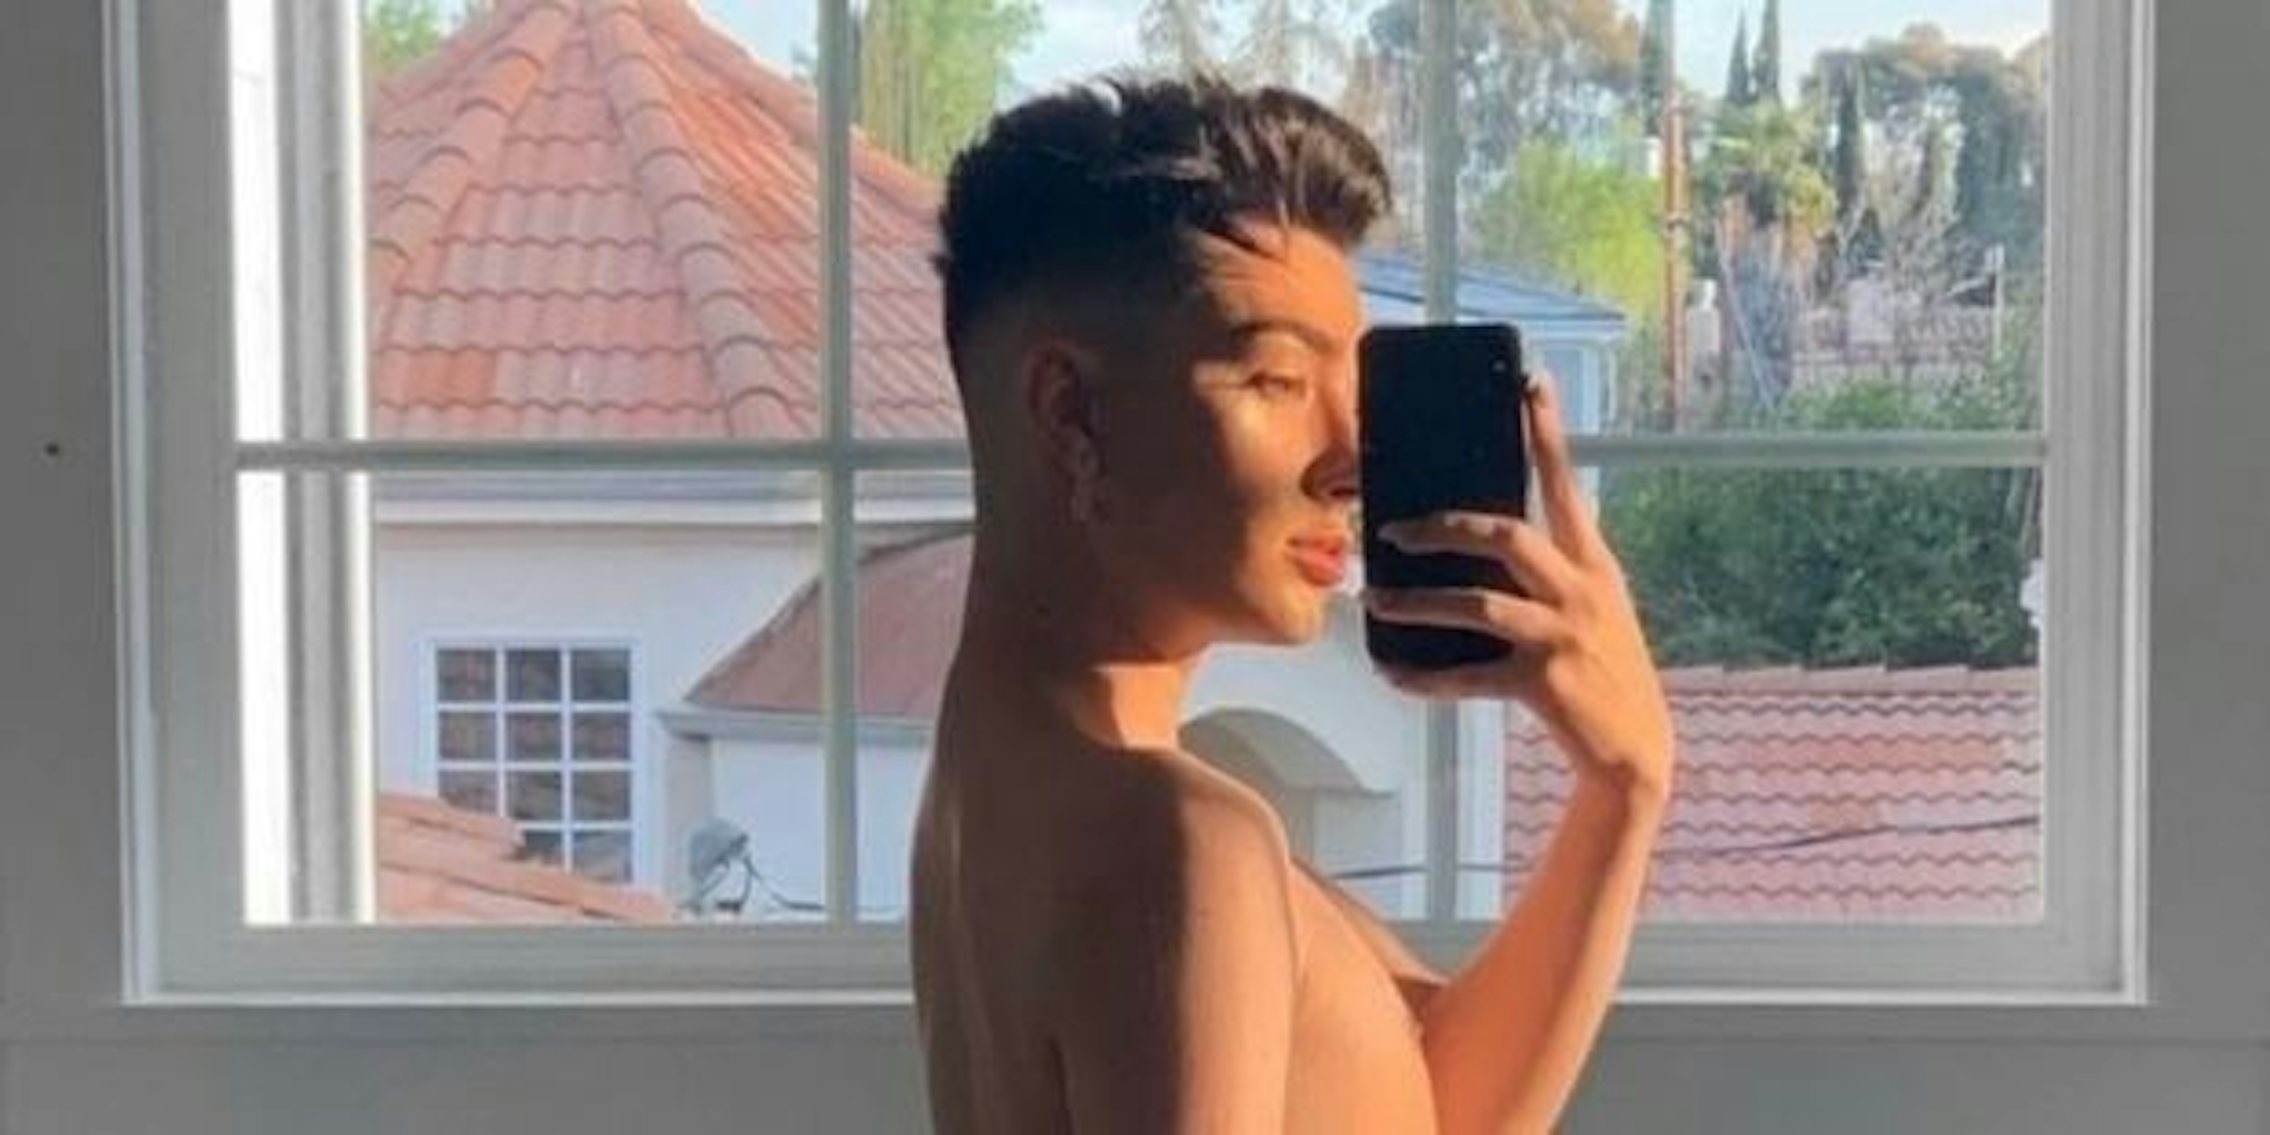 James Charles nude photo Twitter